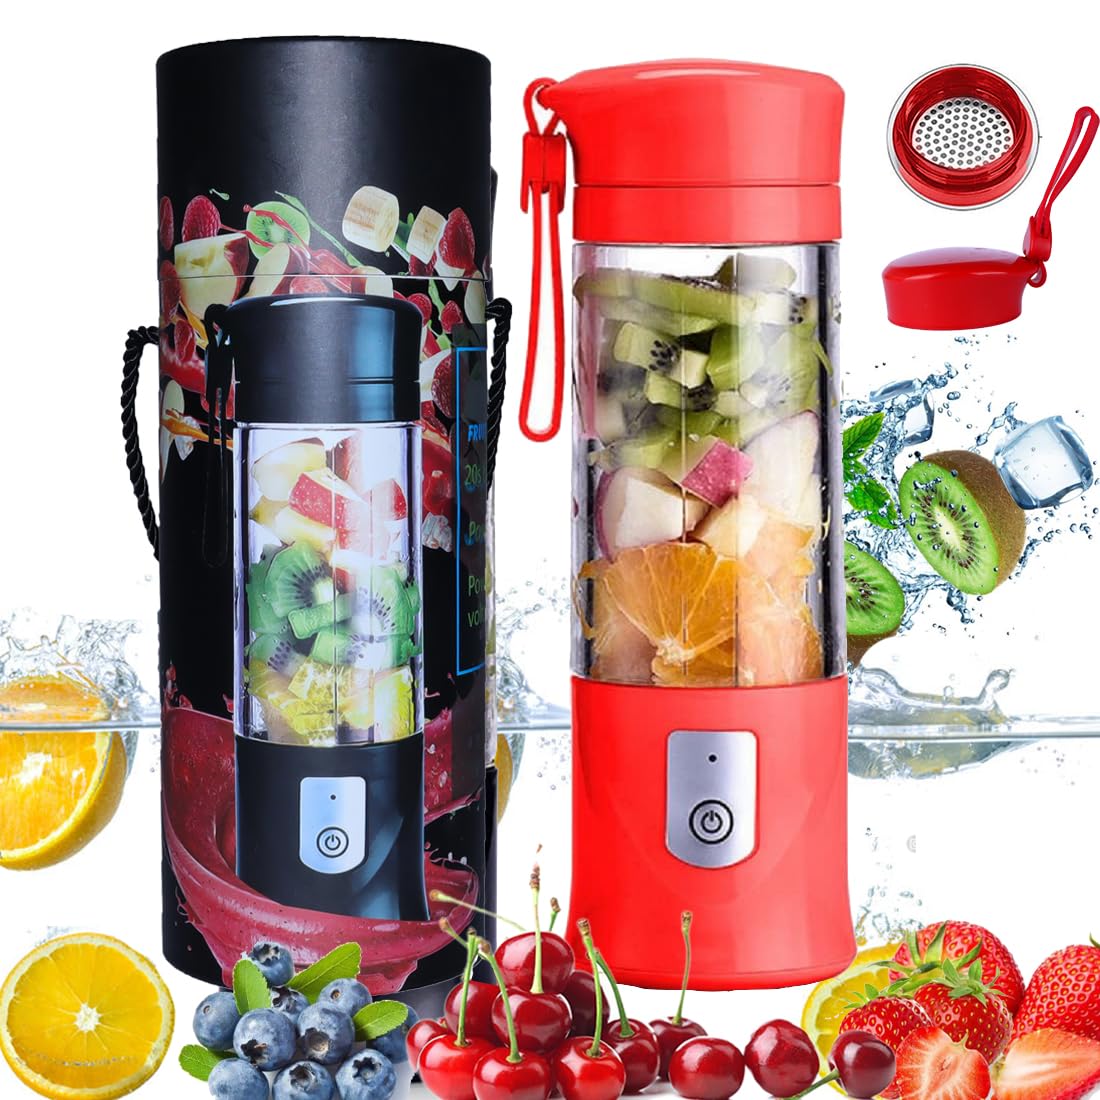 BUYERZONE SB Electric Safety Juicer Cup, Fruit Juice Mixer, Mini Portable Rechargeable/Juicing Mixing Crush Ice and Blender Mixer,420-530ml Water Bottle (Red)